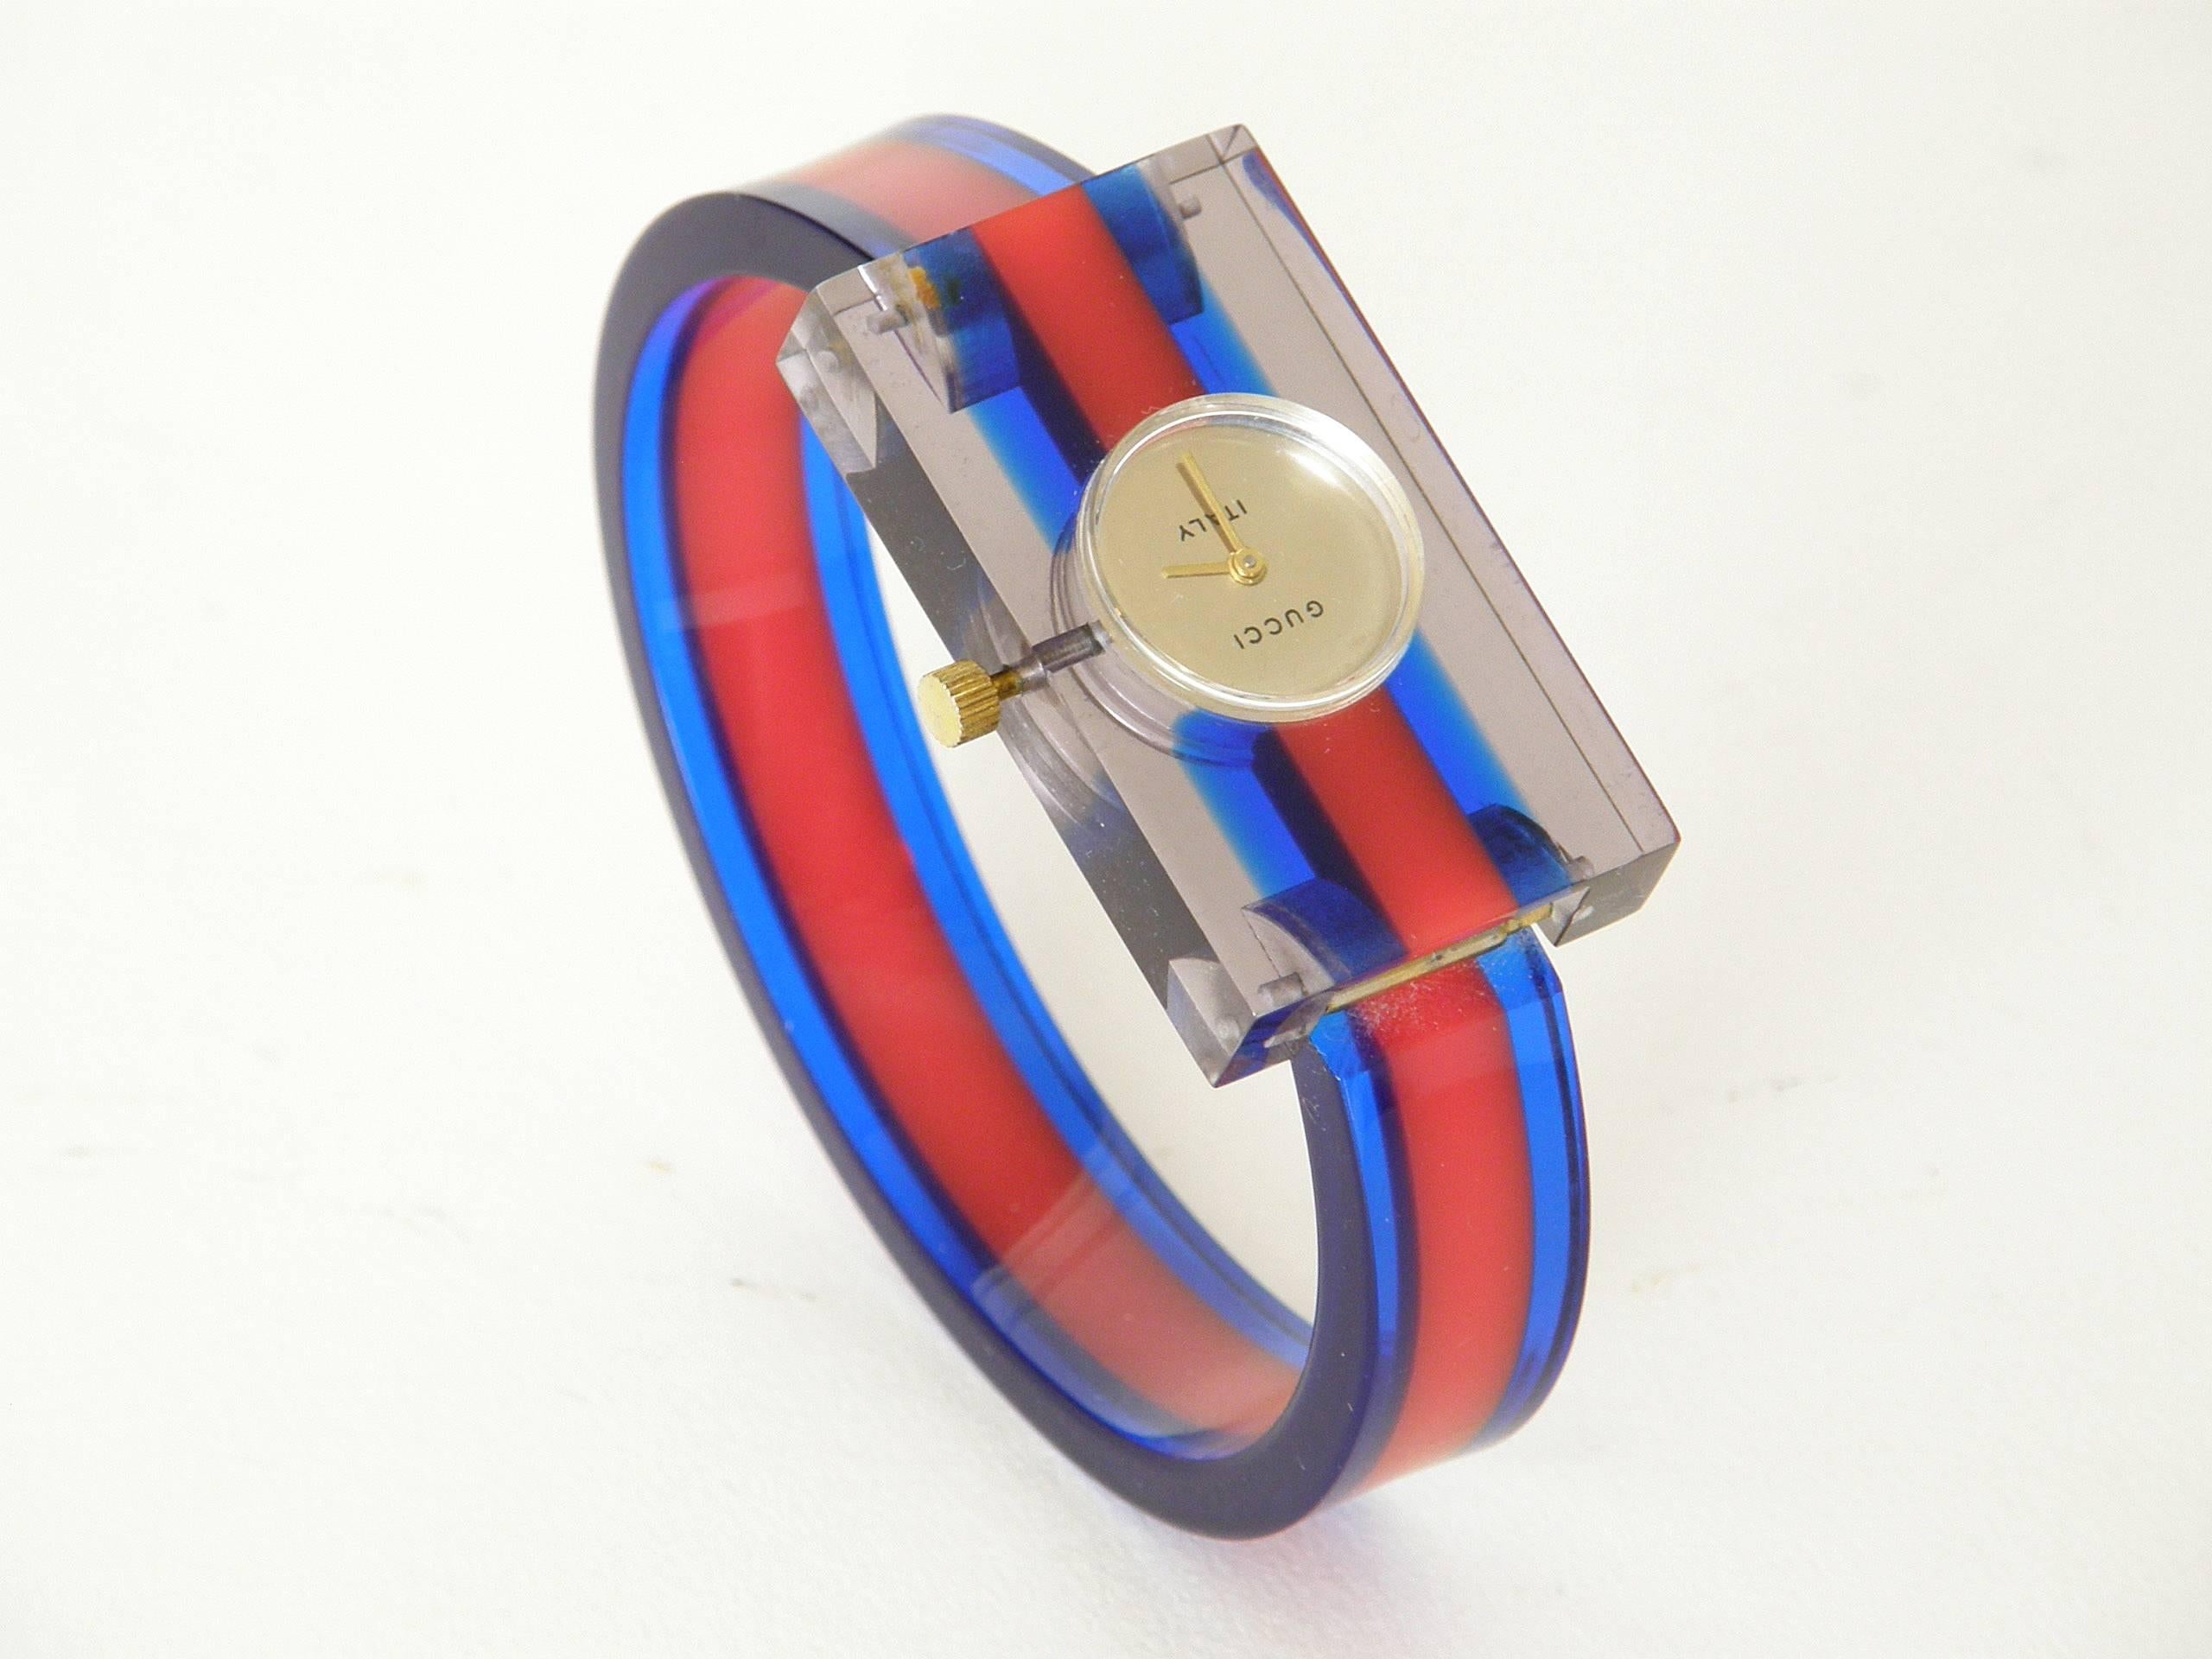 Colorful, striped lucite bracelet watch by Gucci. The rigid band is hinged to the rectangular face. It has a clear "skeleton" back which shows the inner workings of the watch. The light plays nicely through the lucite creating a luminous